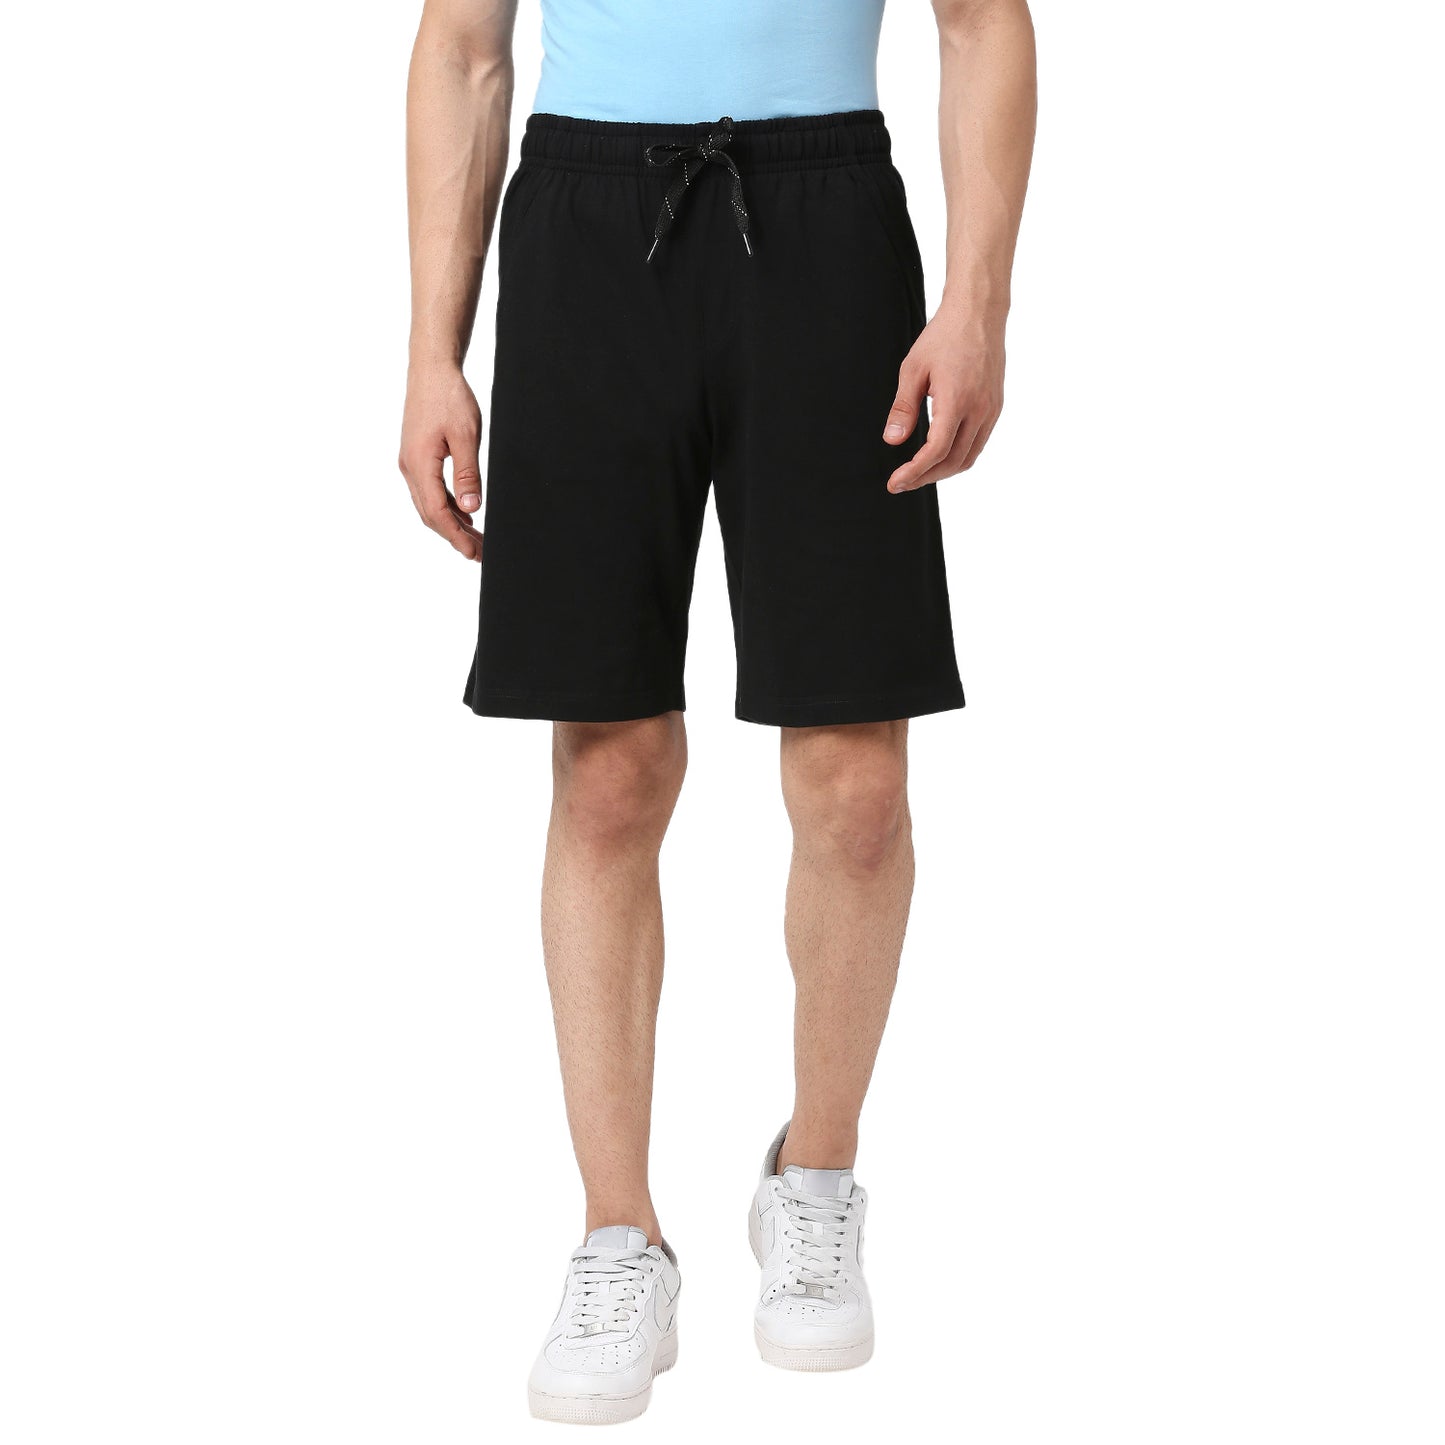 The Everyday Essentials Lounge Shorts